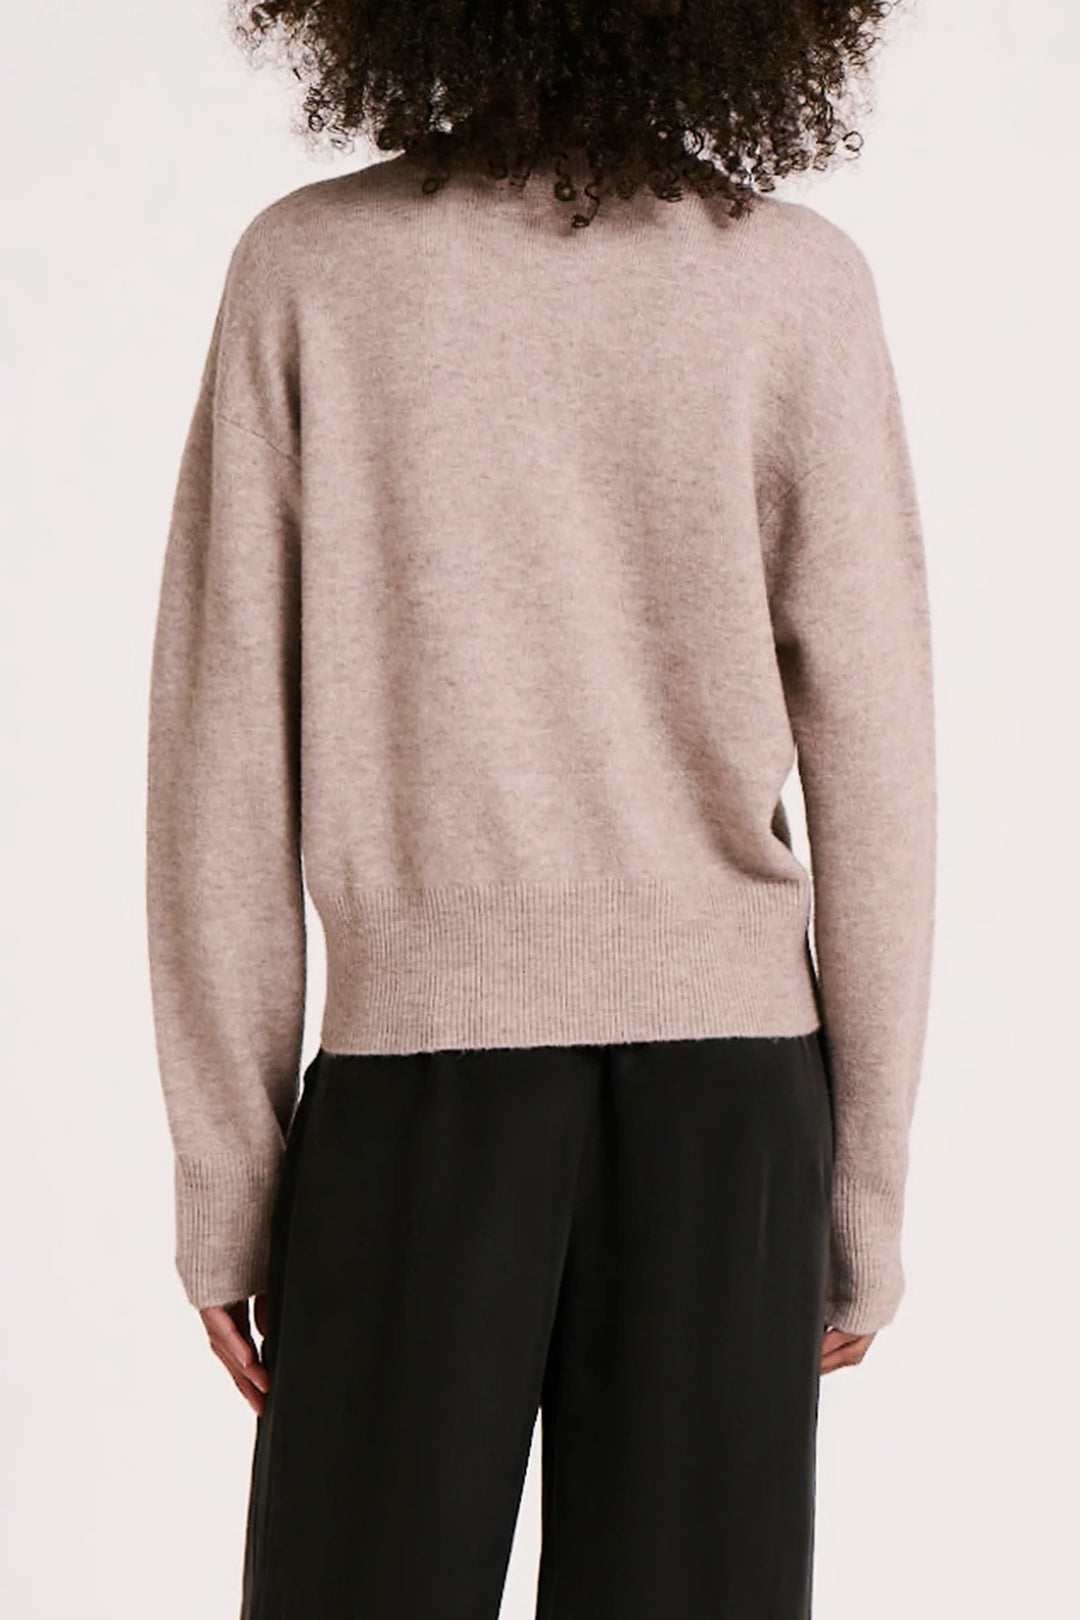 Nude Lucy Saber Wool Knit- Ash